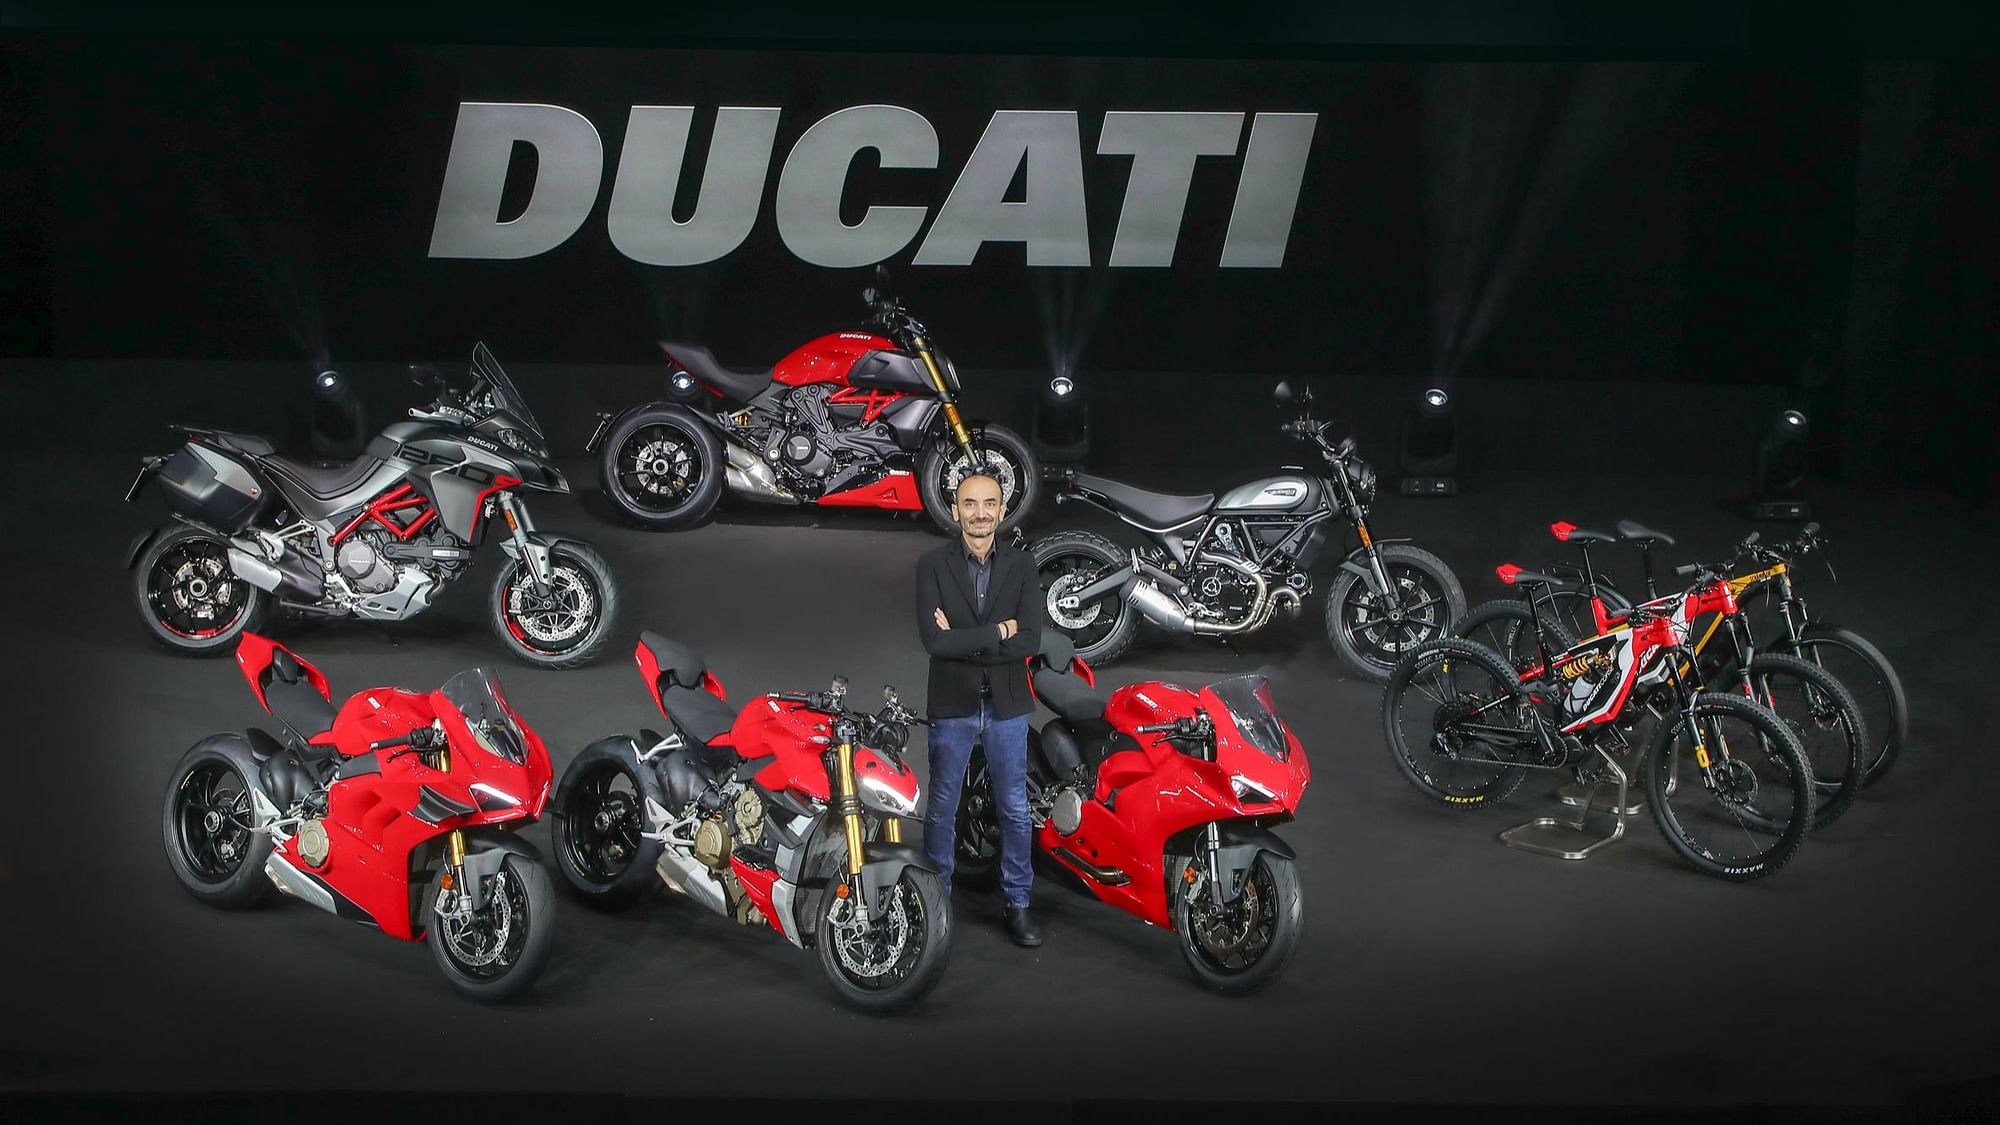 The new Ducati 2020 lineup unveiled, includes electric bicycles as well.